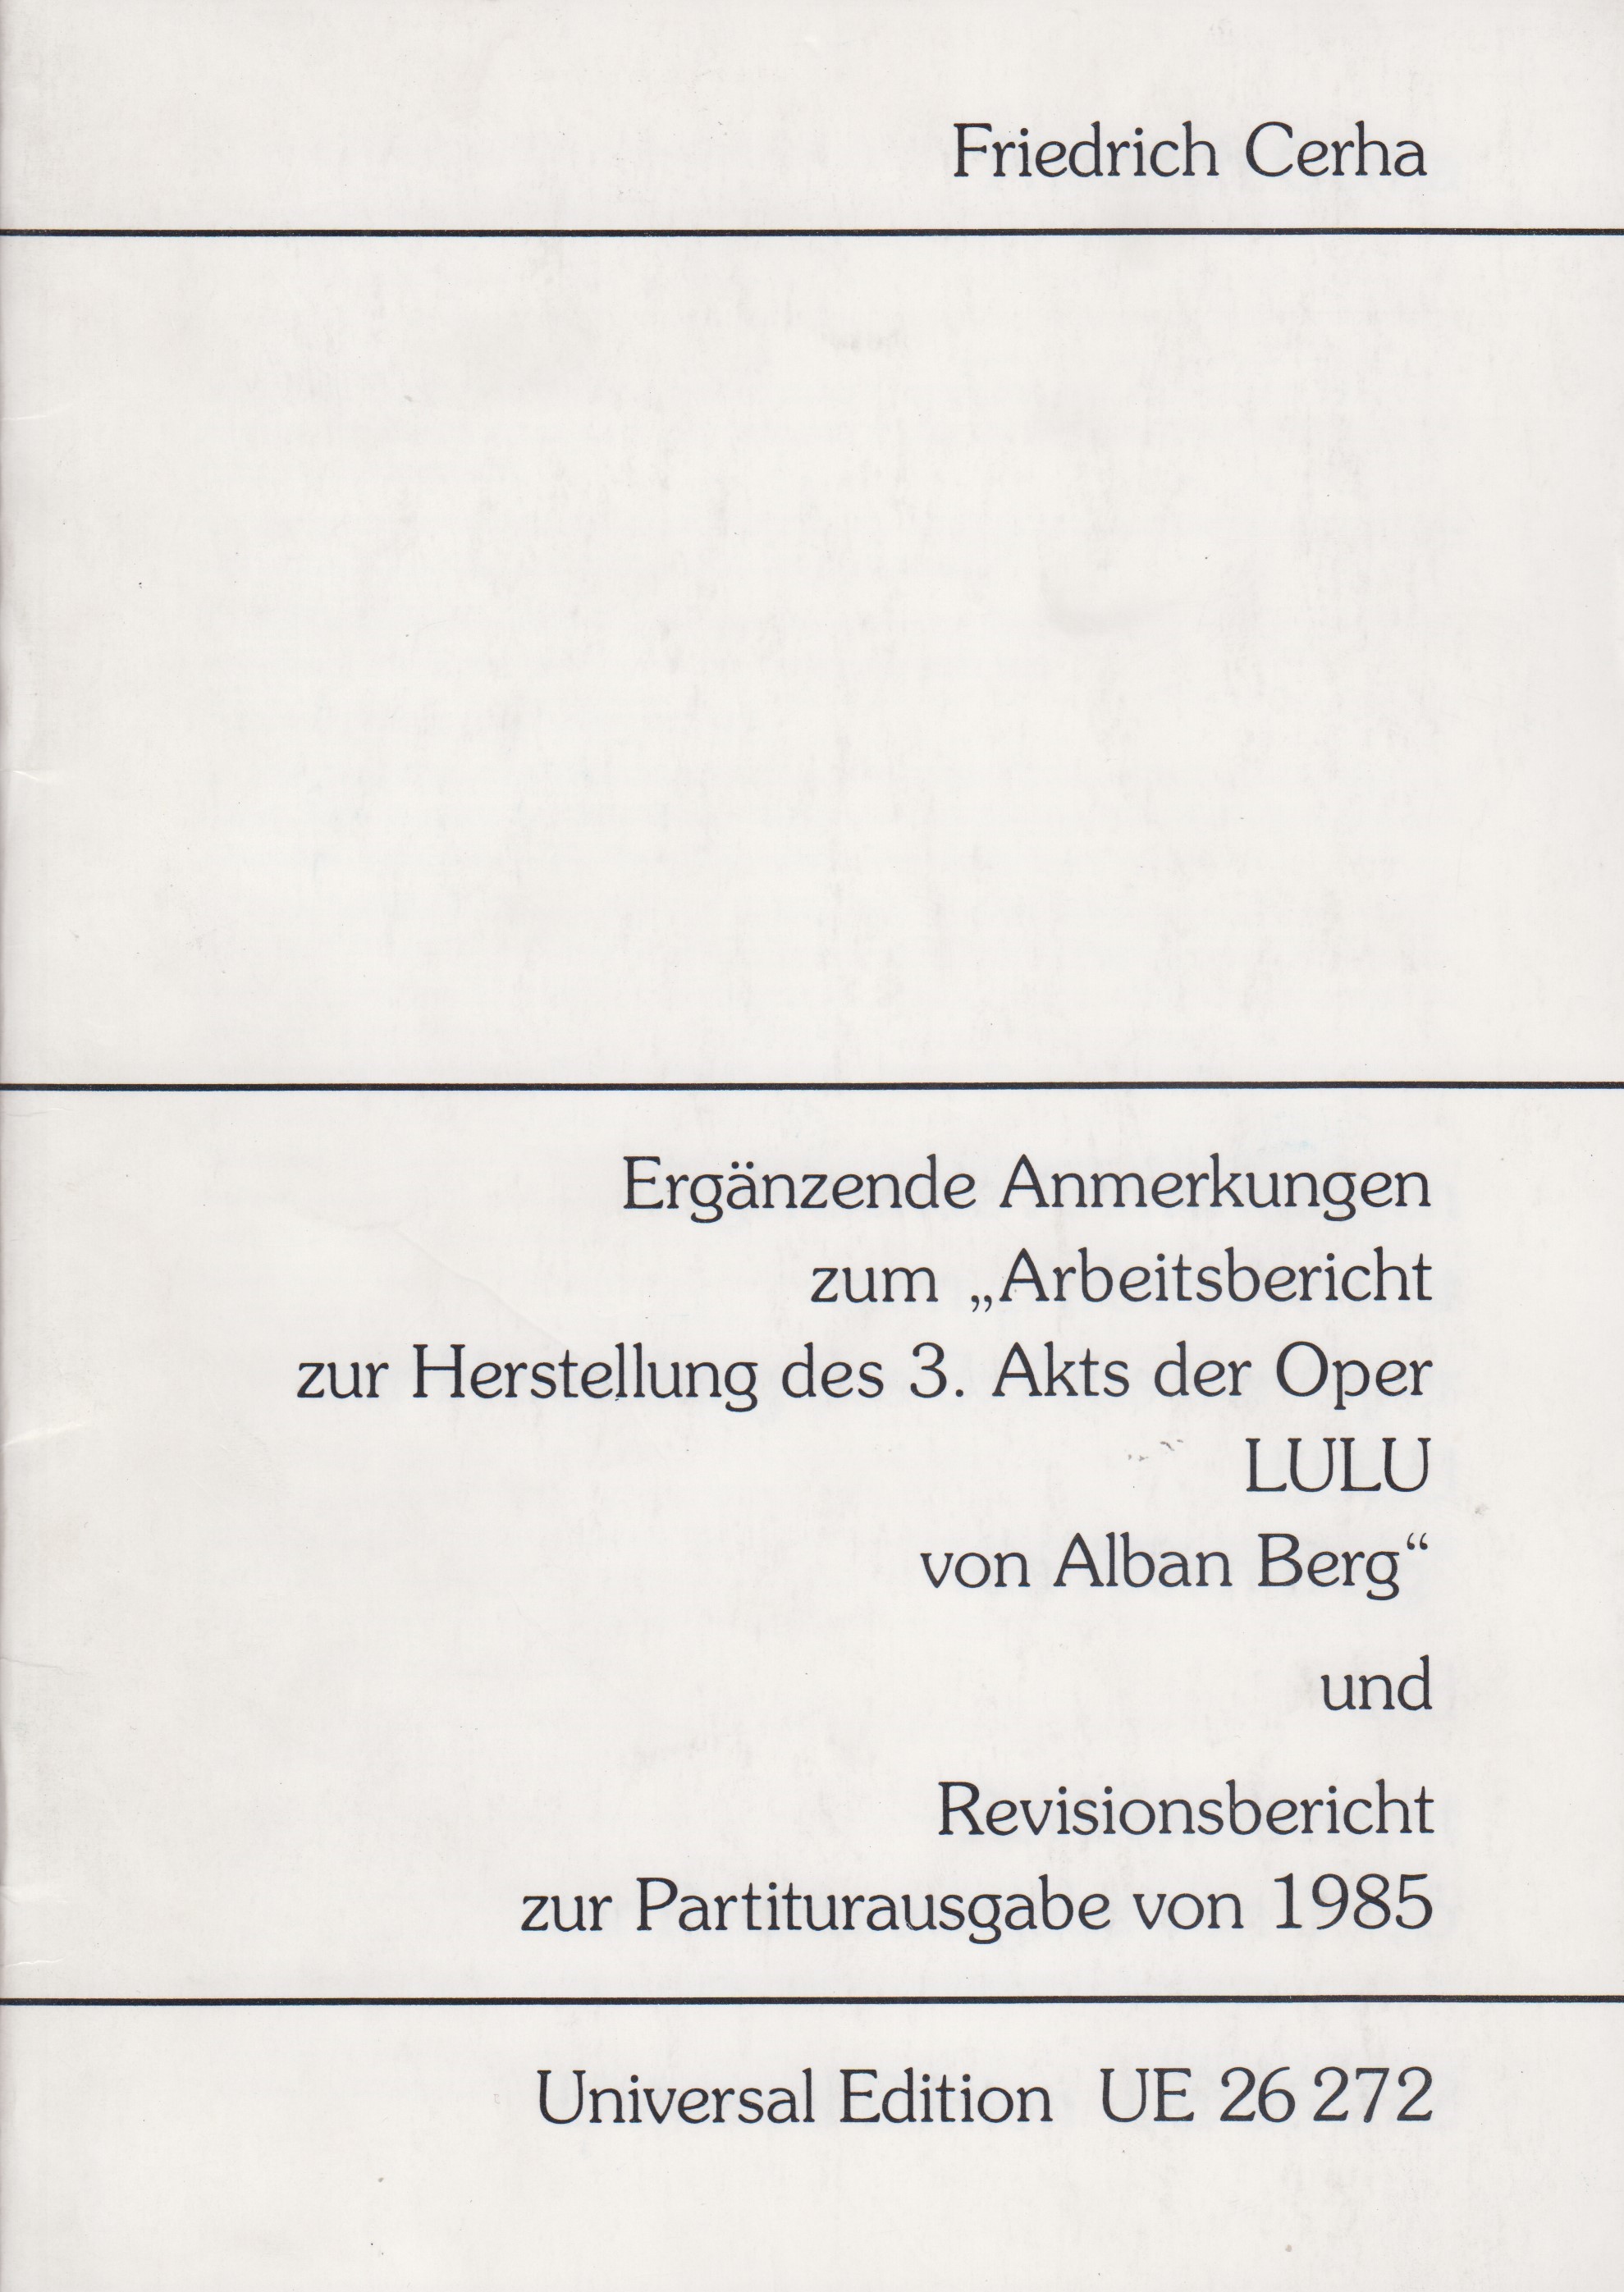 Additional comments on the work report of the 3rd Act of the opera Lulu from Alban Berg